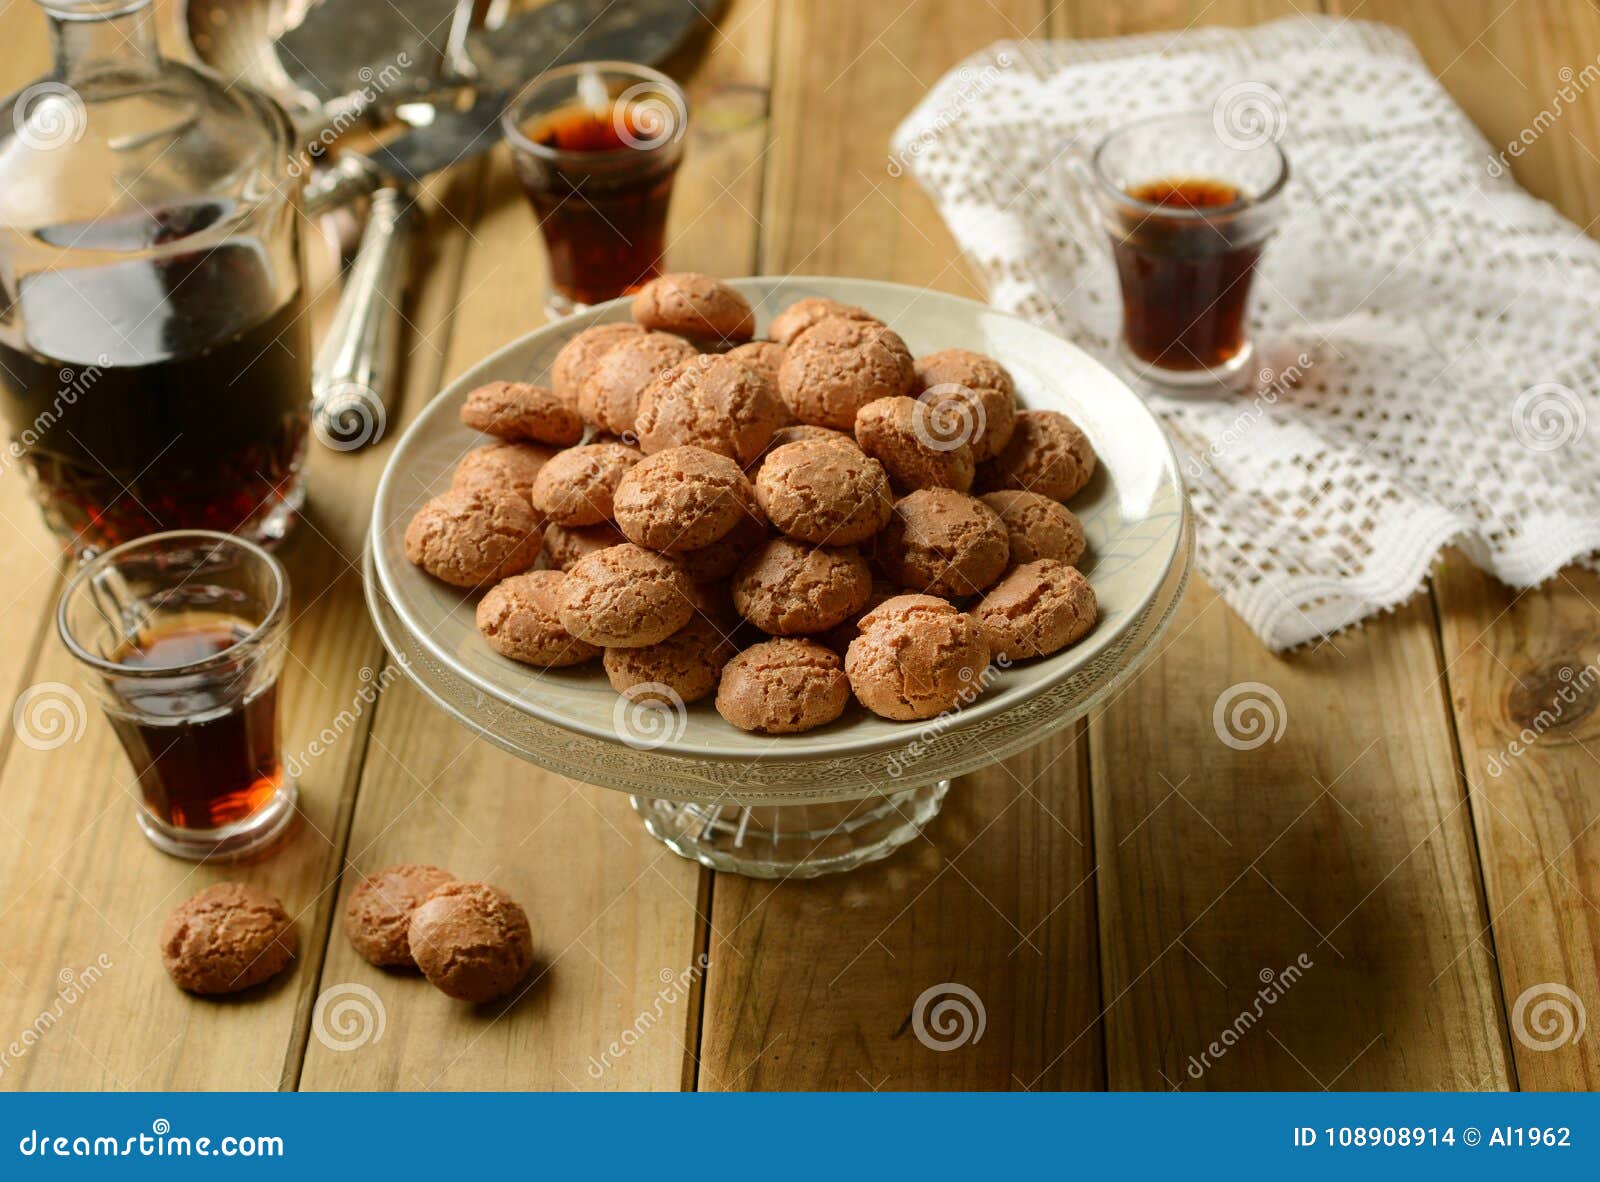 Amaretti Cookies With Liqueur Beside - Traditional Italian Pastry